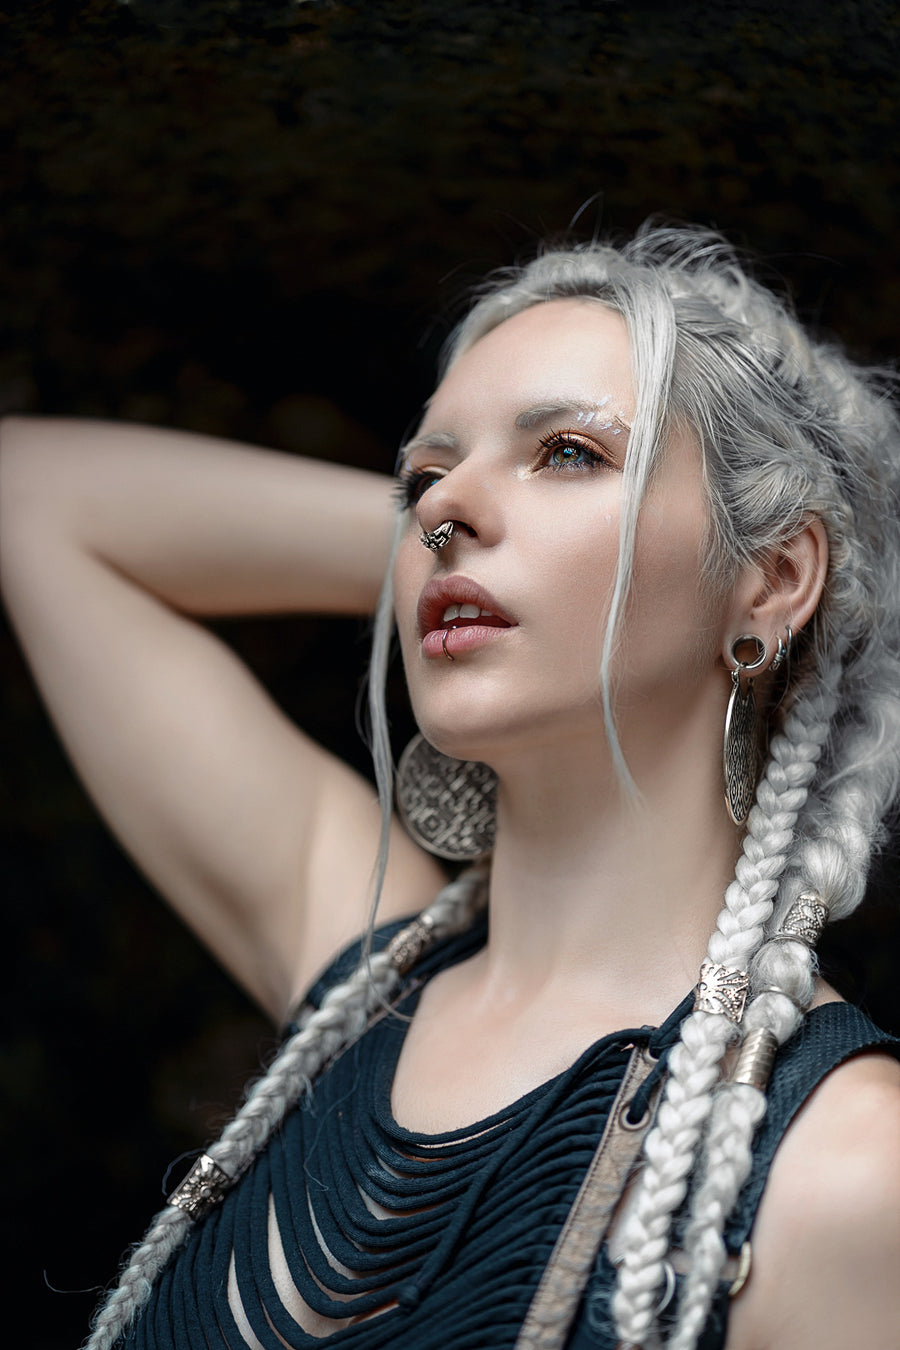 Elegant silver septum clicker showcased on a woman with braided platinum hair and ethereal makeup, reflecting a blend of traditional and alternative style.